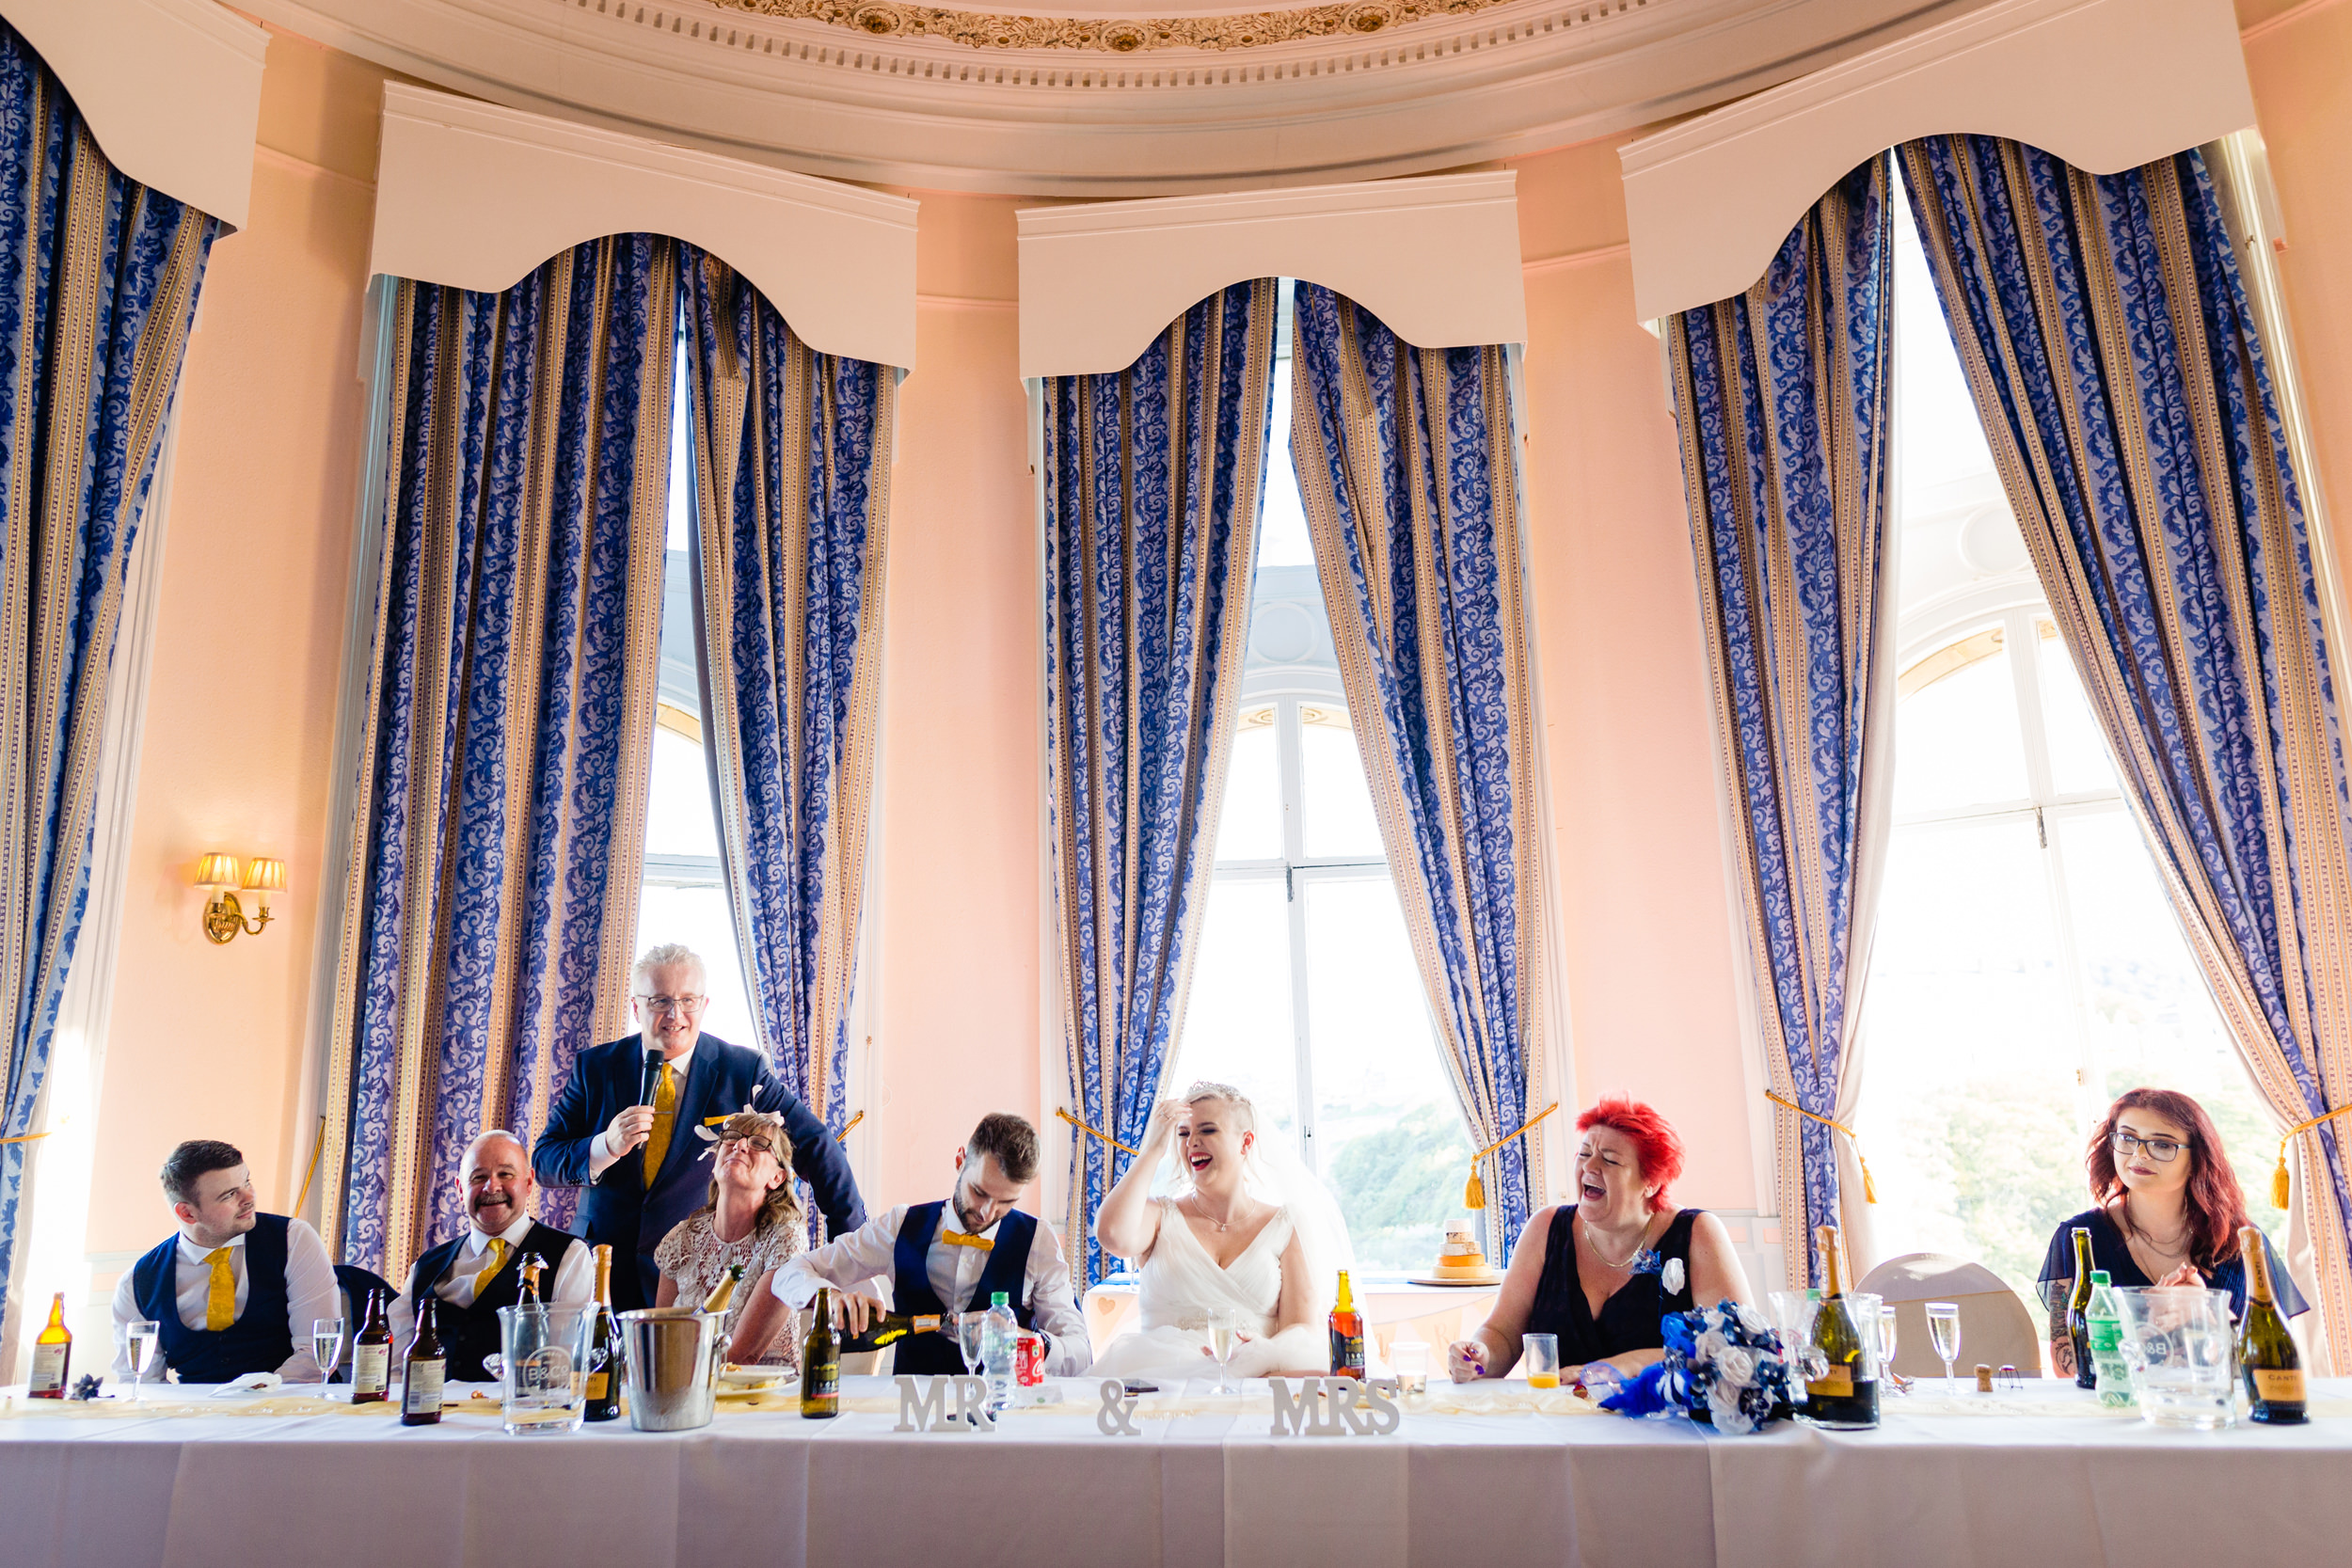 top table during speeches. grand hotel scarborough wedding photography by emma and rich.